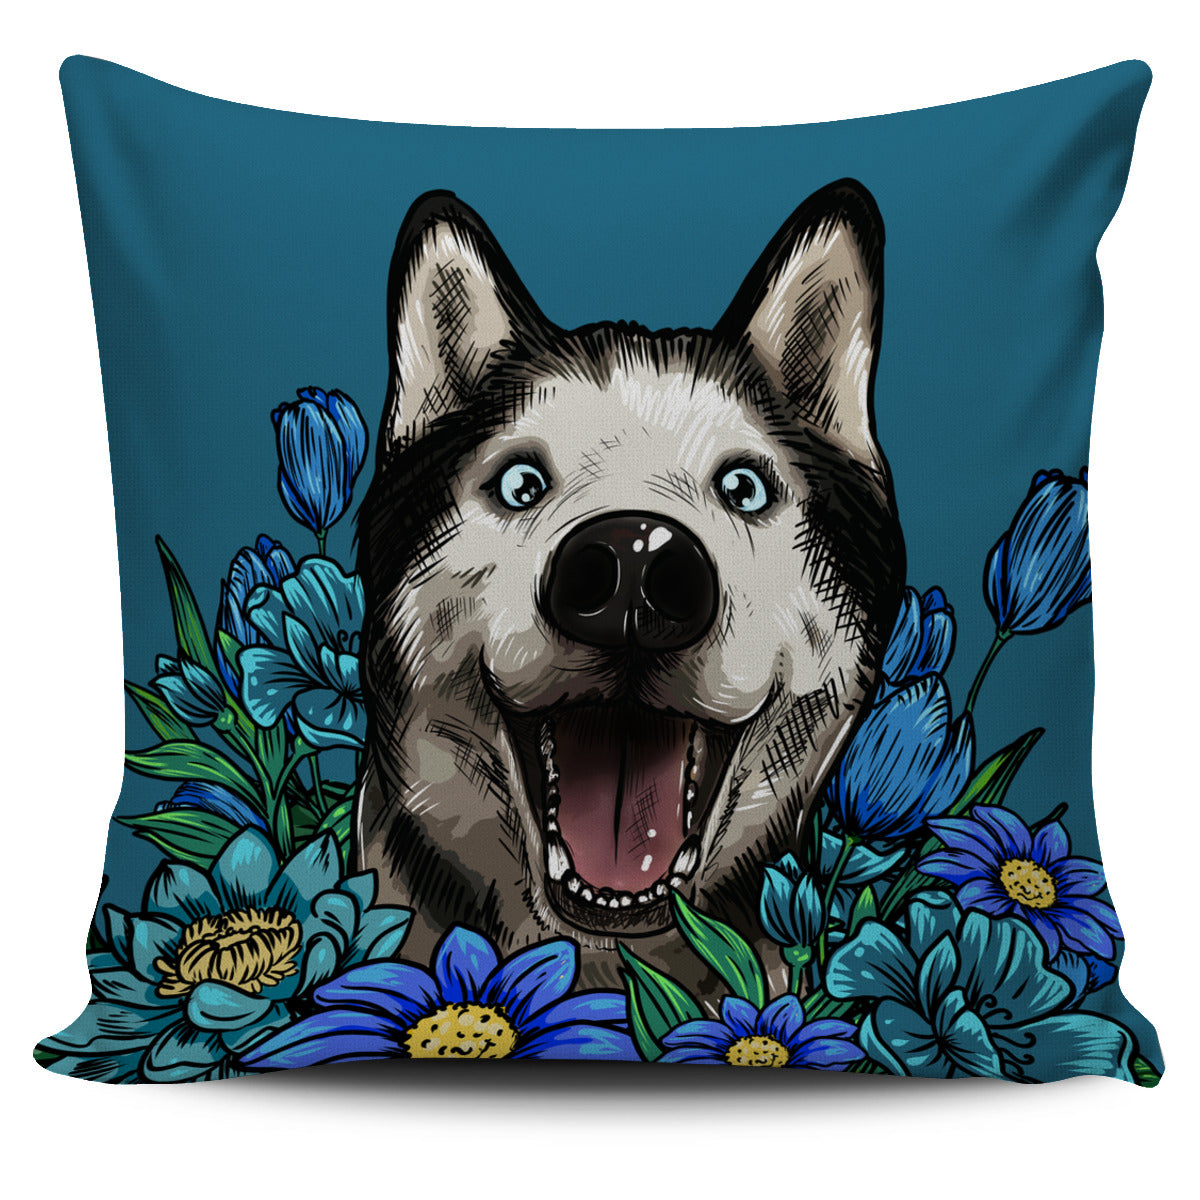 Illustrated Siberian Husky Pillow Cover